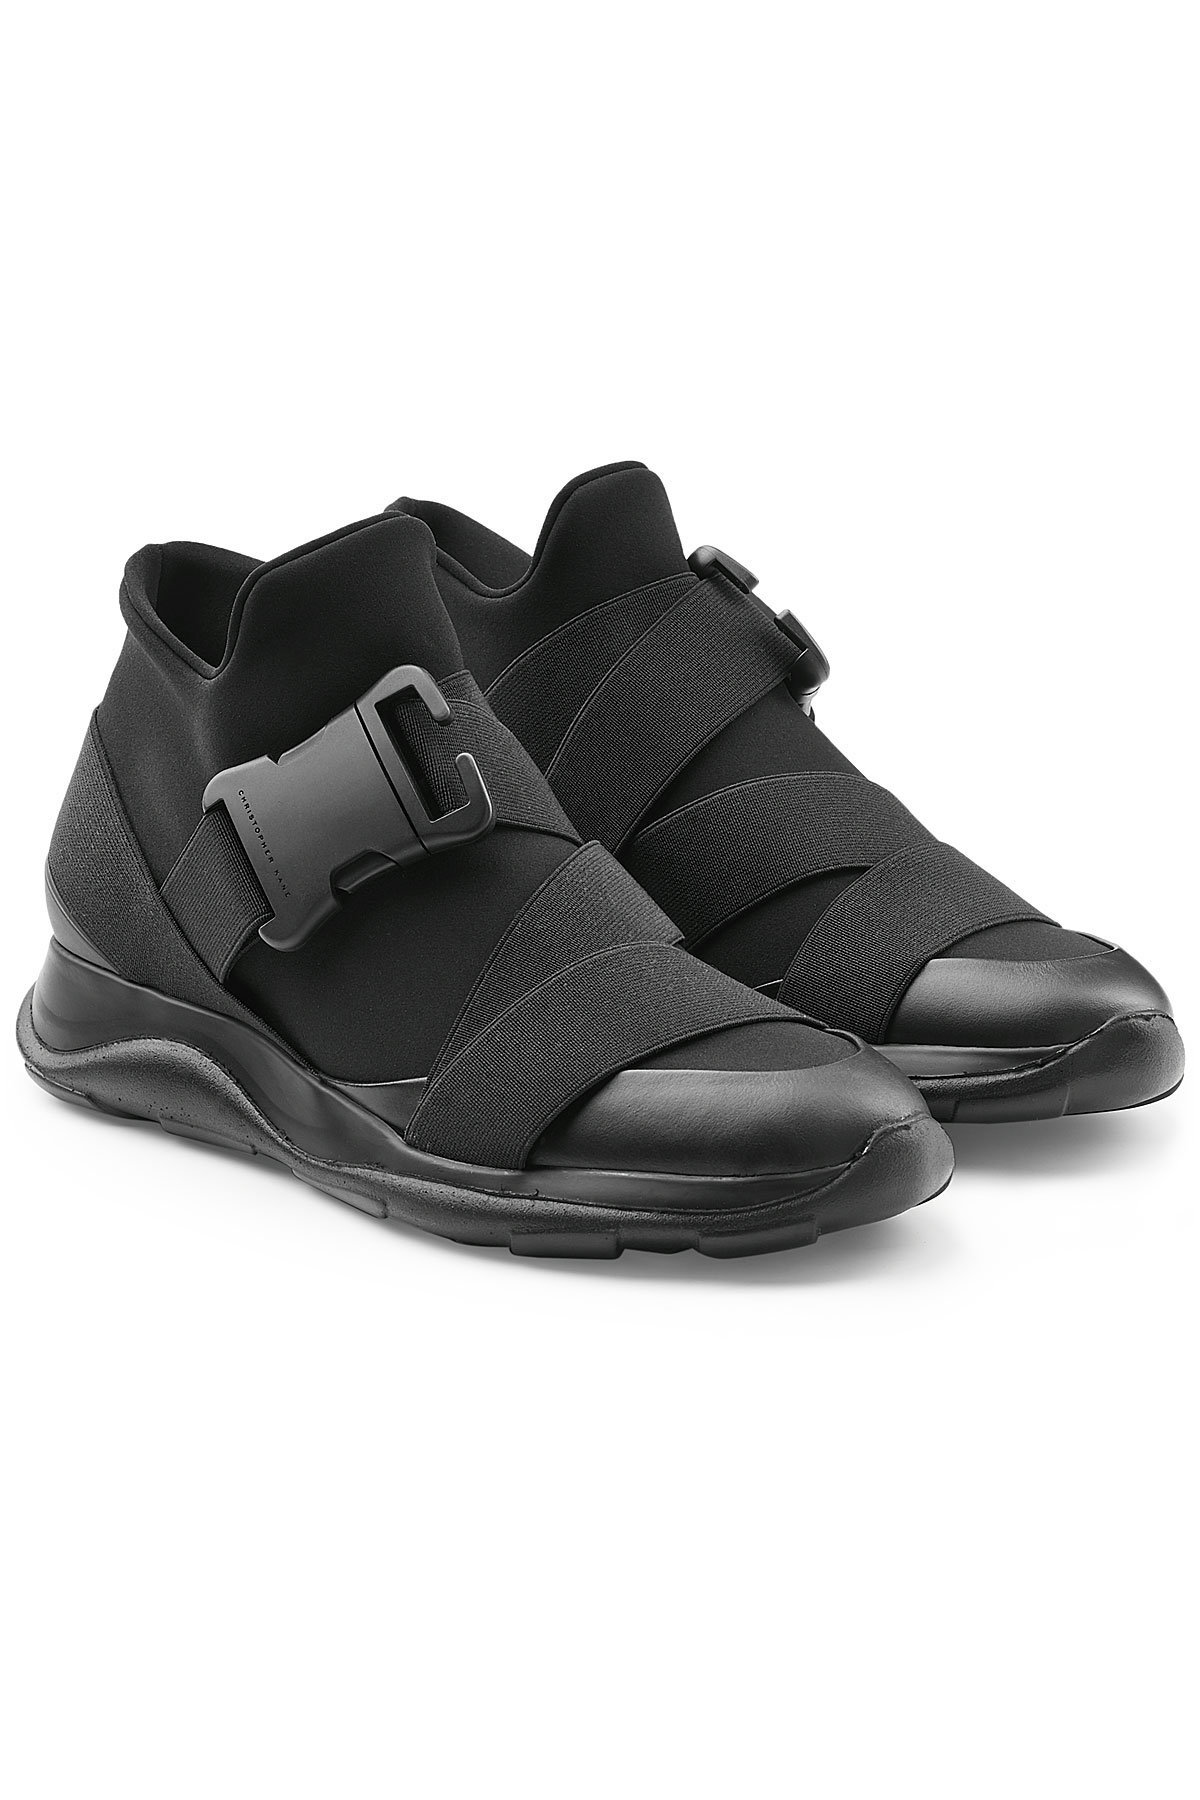 Christopher Kane - High-Top Sneakers with Leather